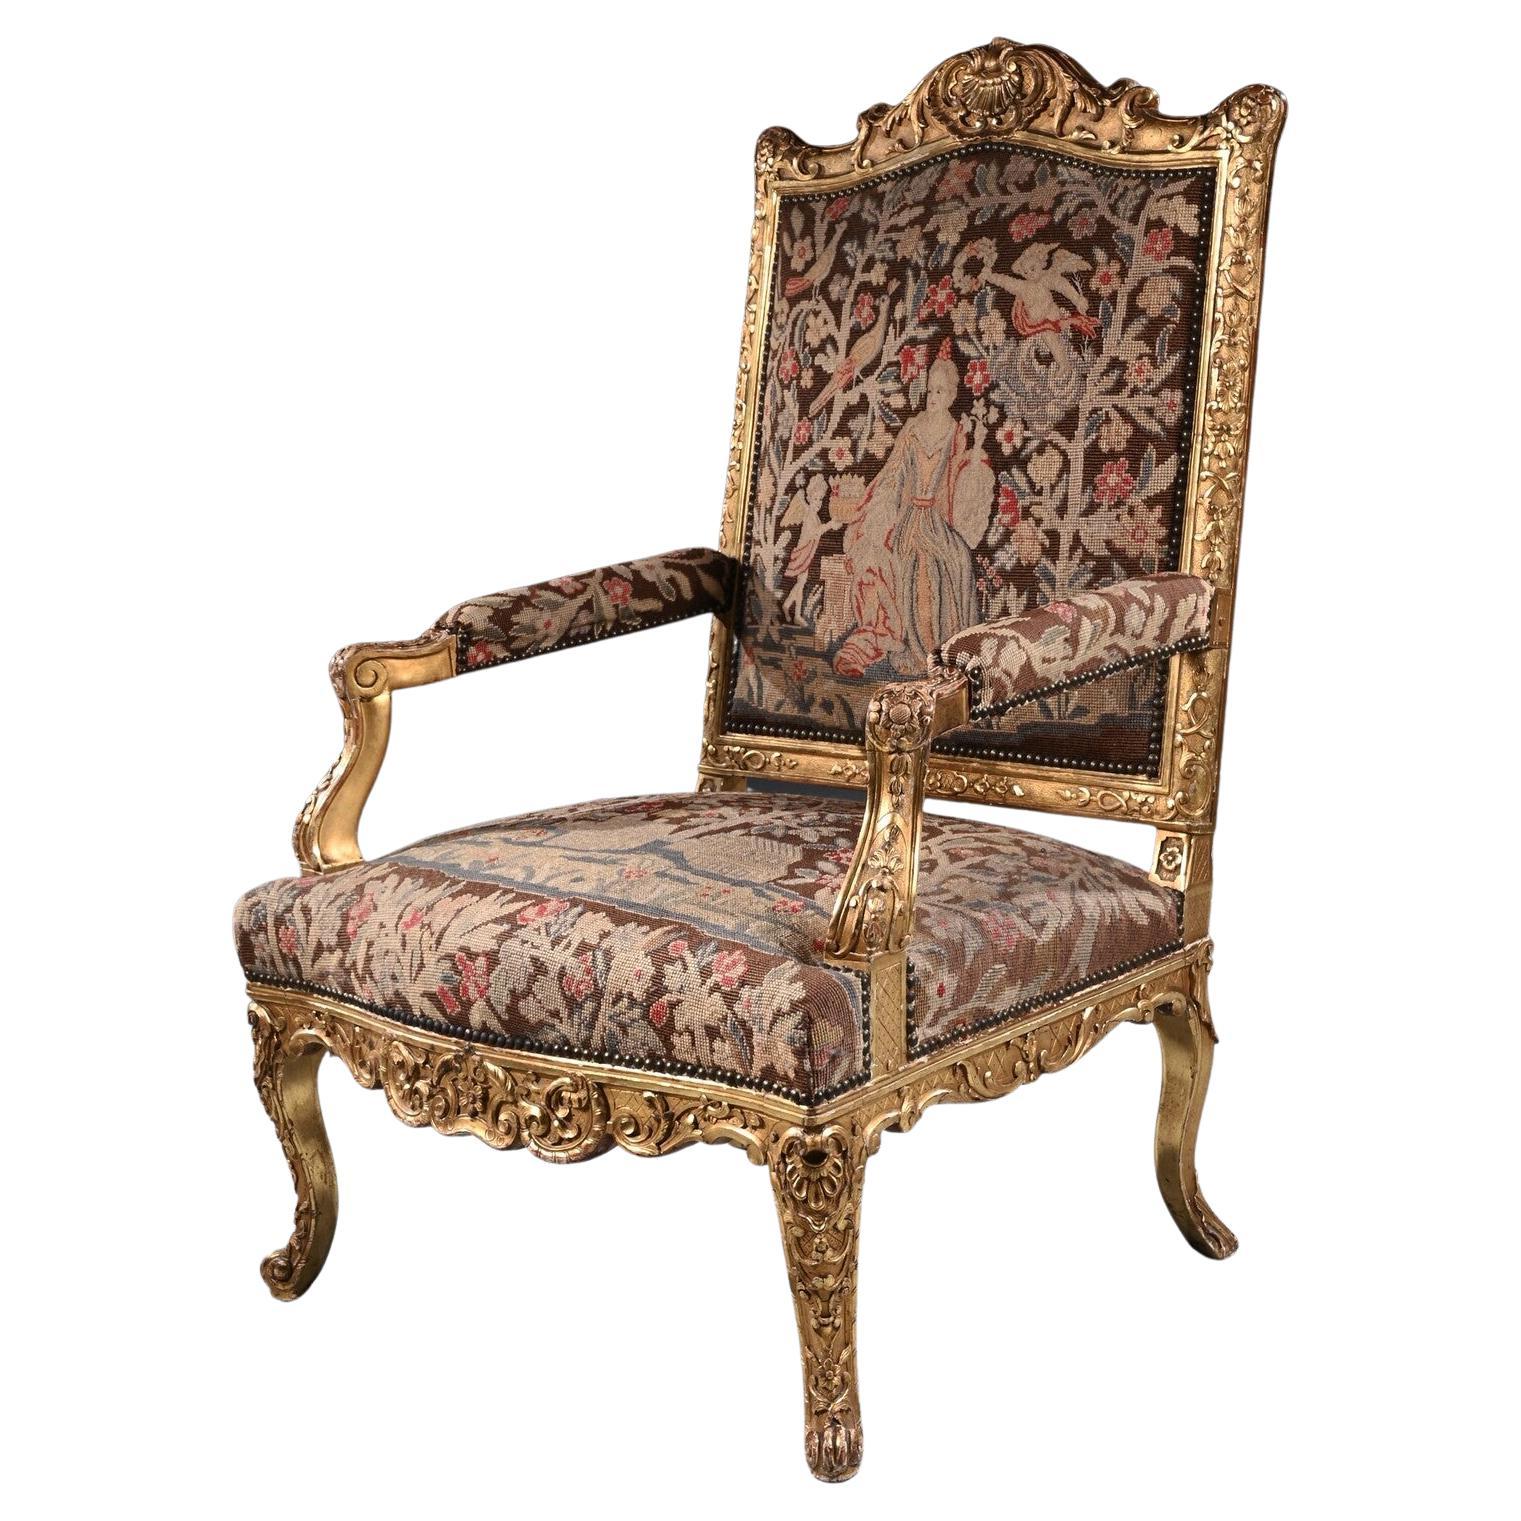 Fine 18th Century French Regence Period Giltwood Armchair Fauteuil For Sale